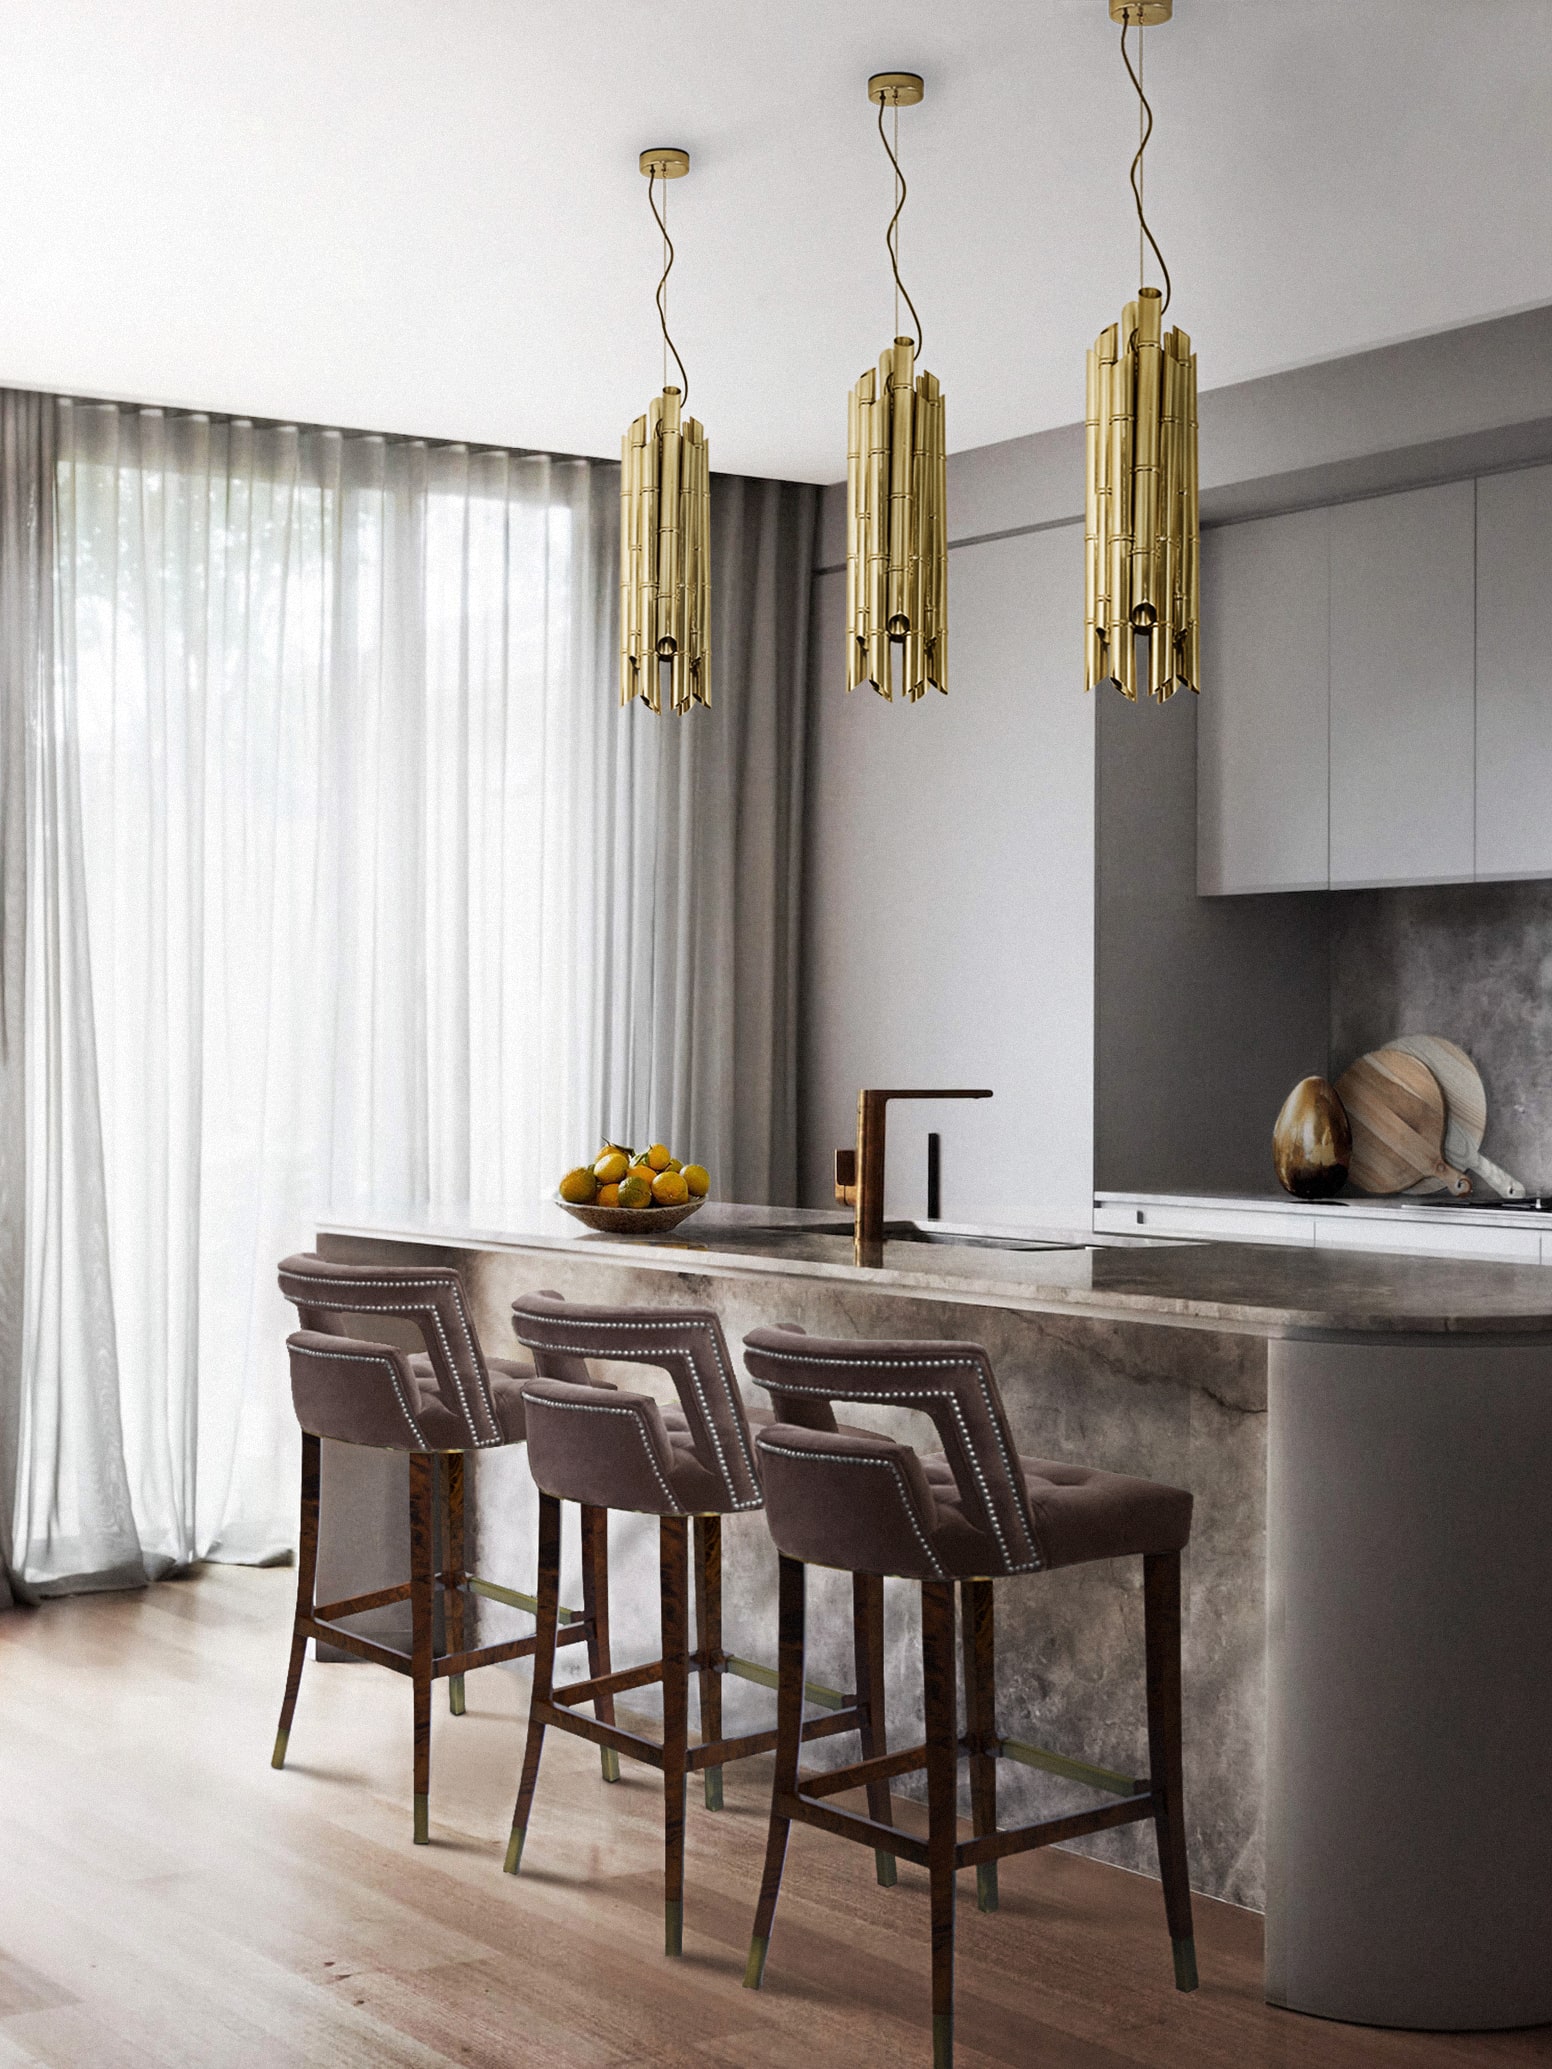 Alluring And Luminous Modern Kitchen Layout with Velvet Counter Stool - Home'Society